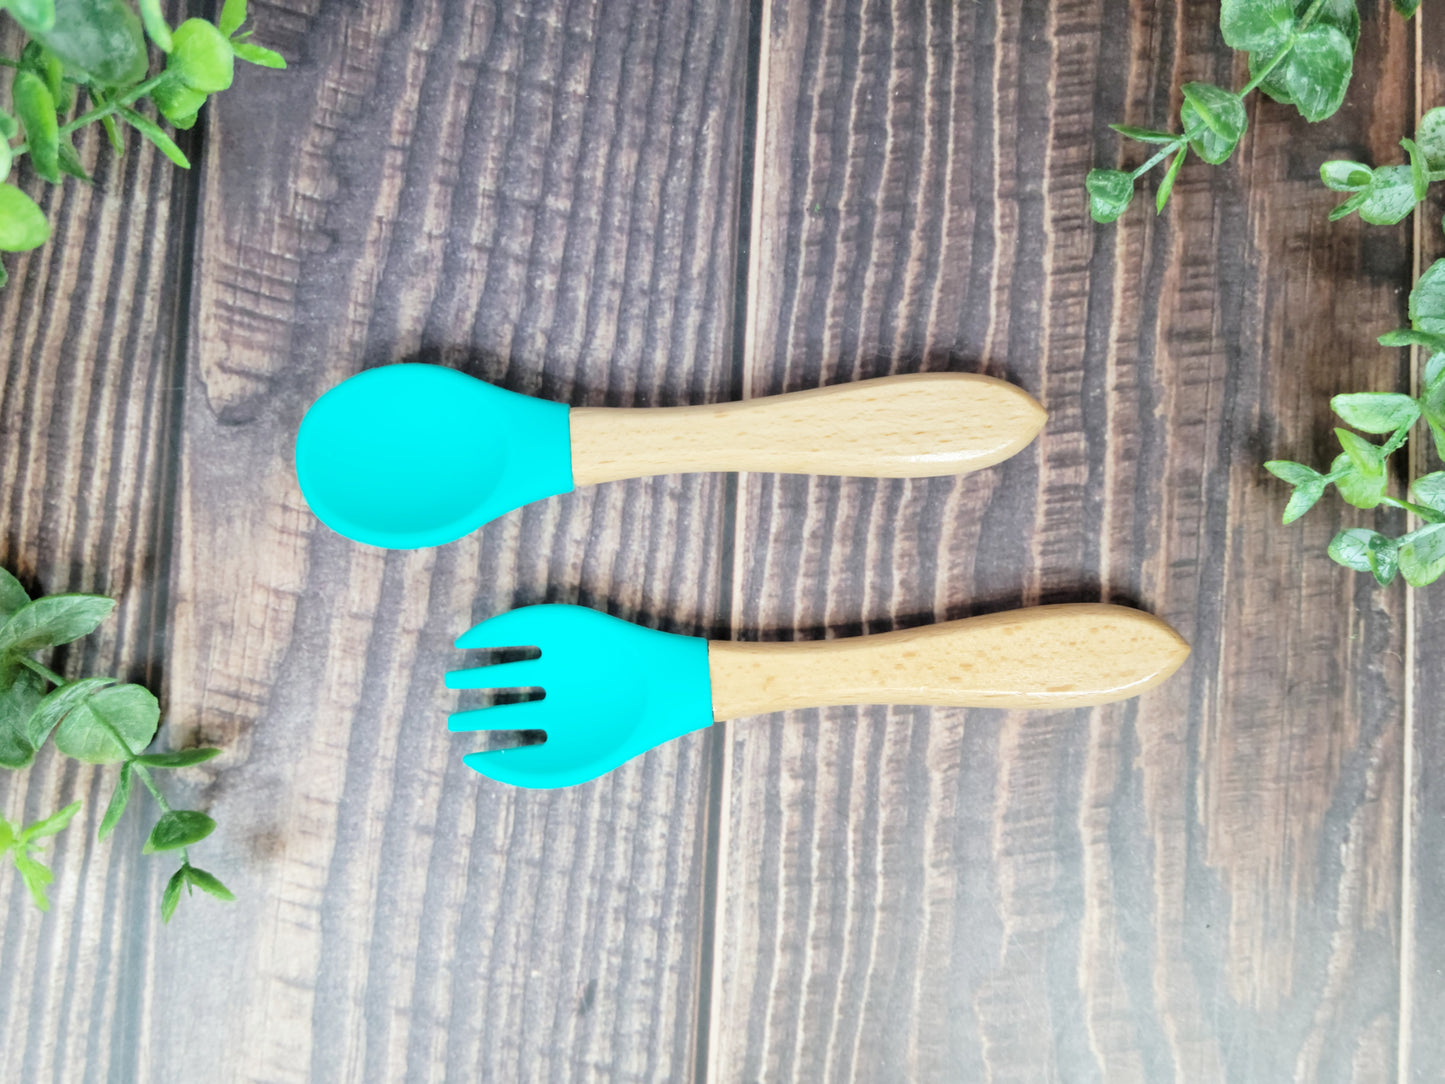 Fork & Spoon set, Silicone and wood handle silverware set, spoon and fork set, silverware for engraving, engraving blanks